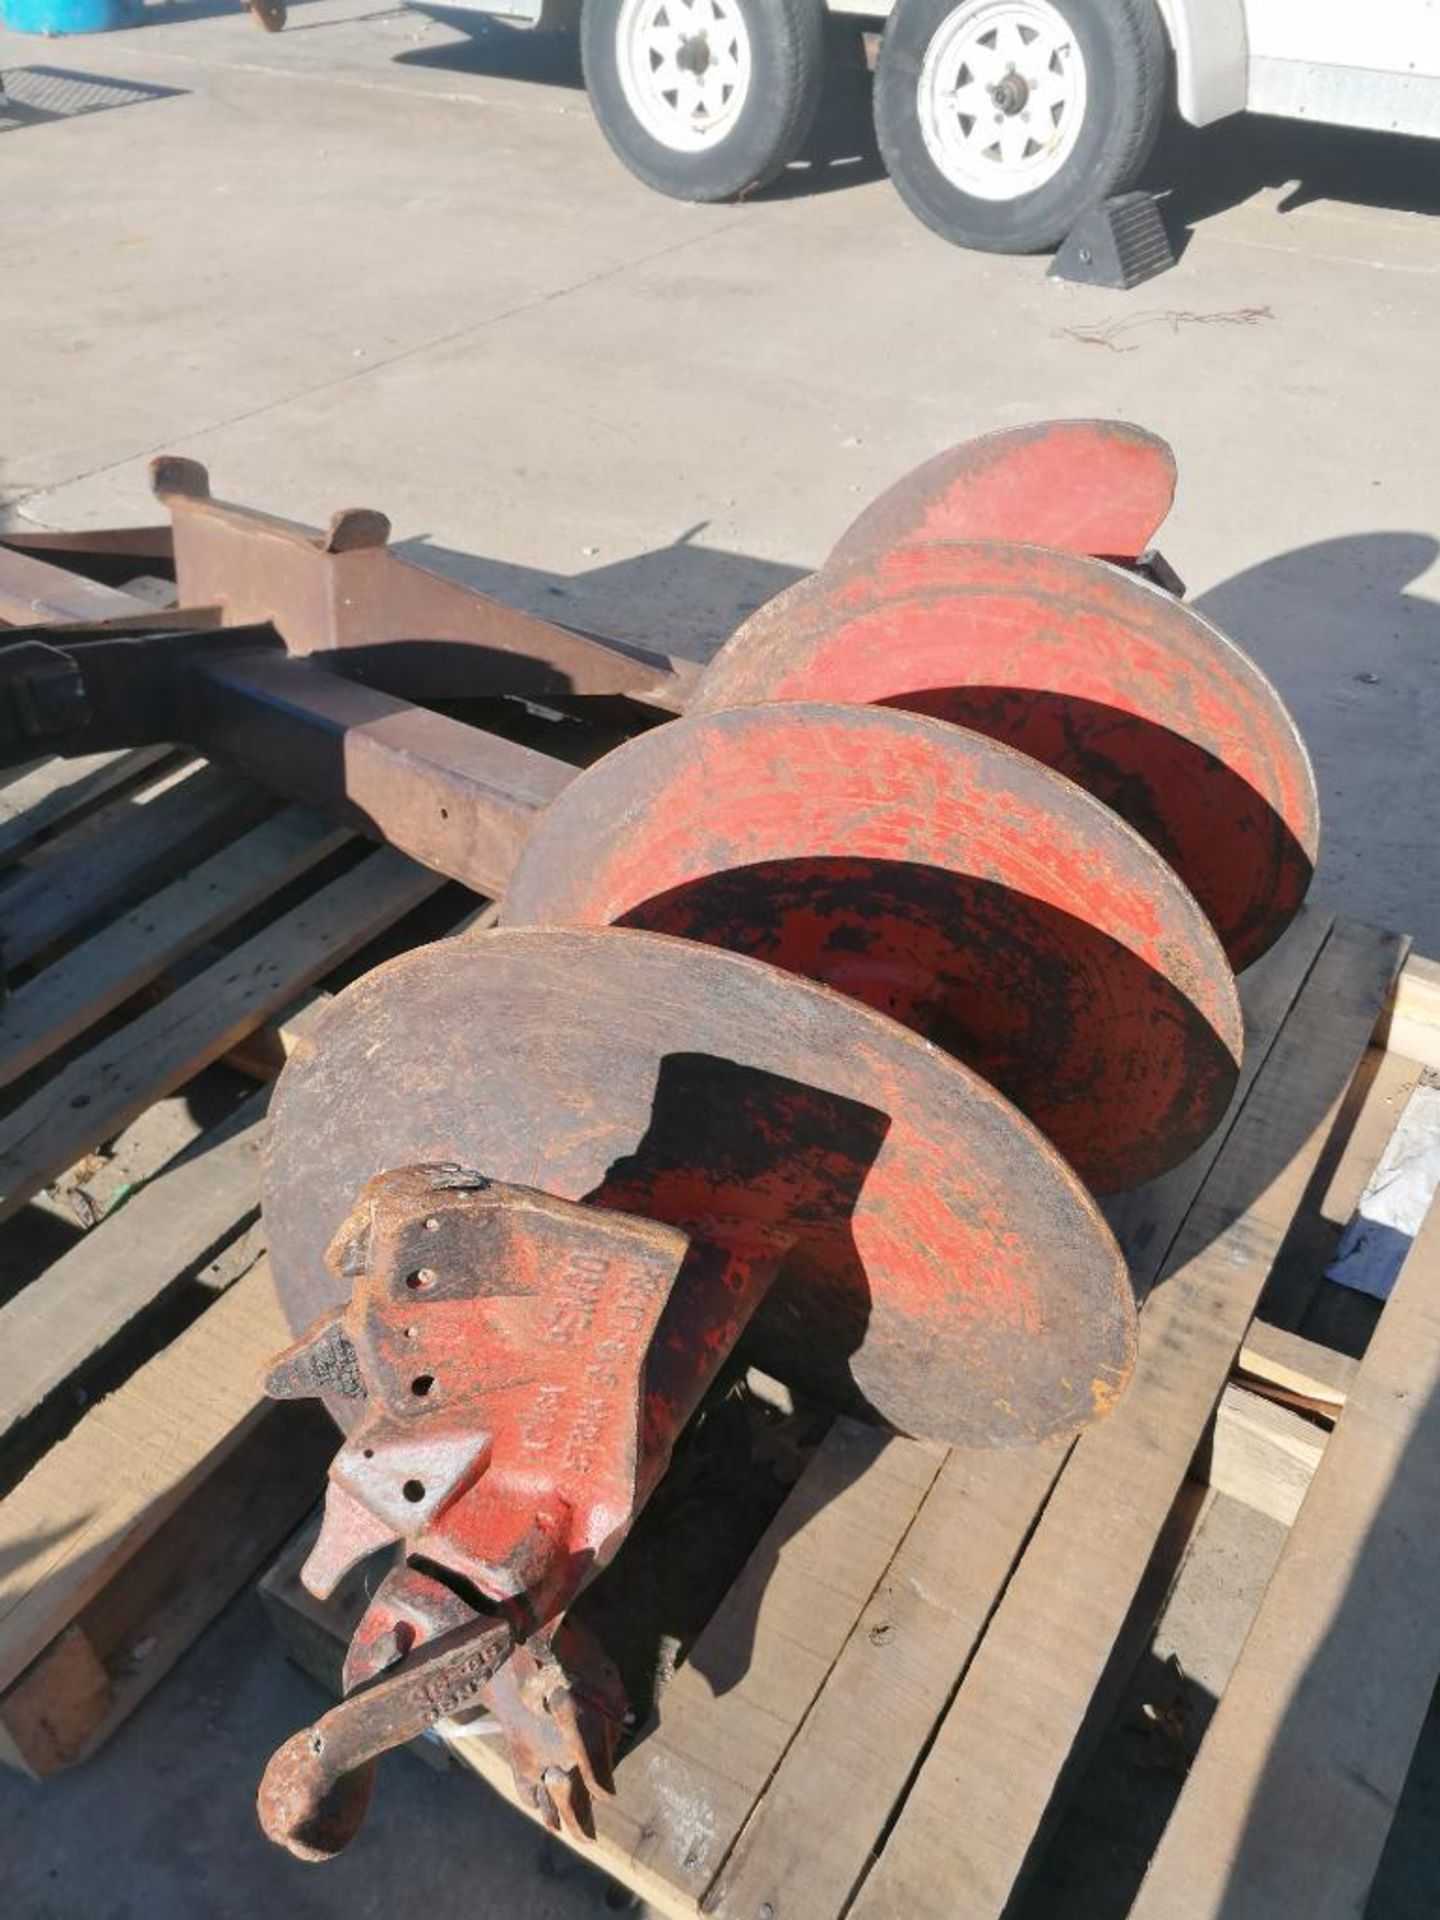 16" Auger Bit. Located in Hazelwood, MO.